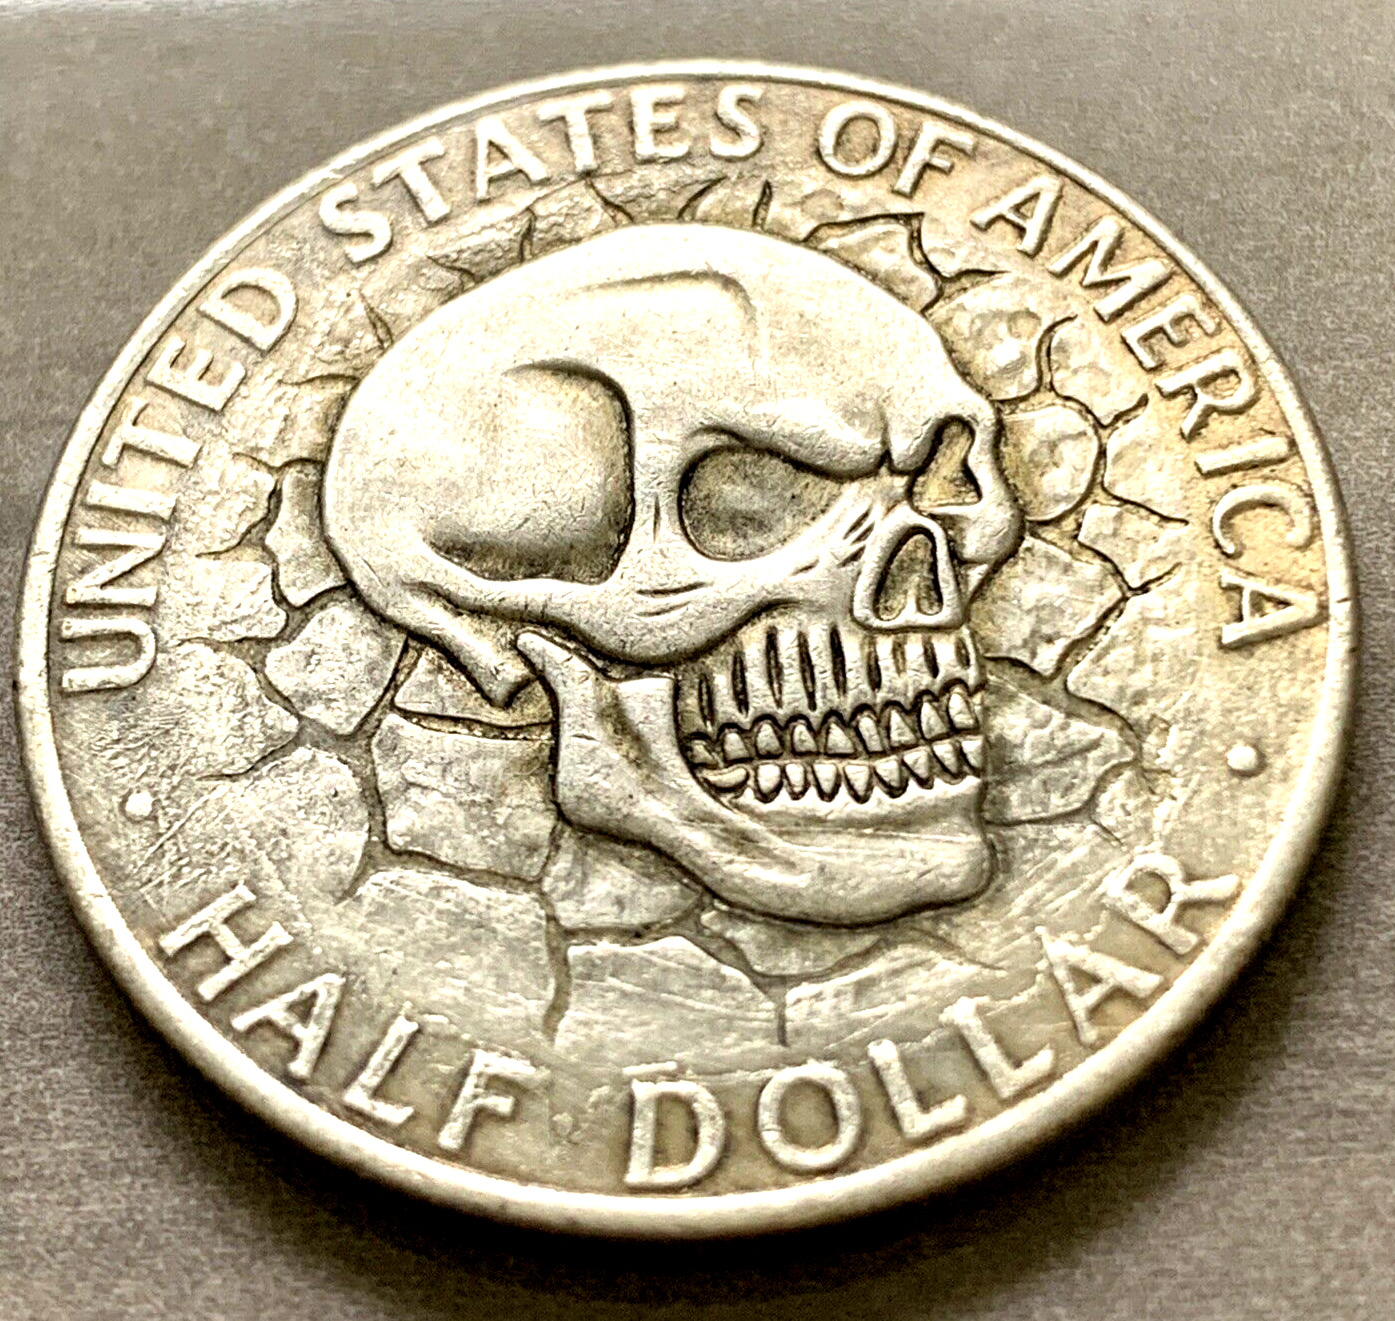 Cracked Cool Skull Novelty Heads Tails Challenge Coin Antique Finish